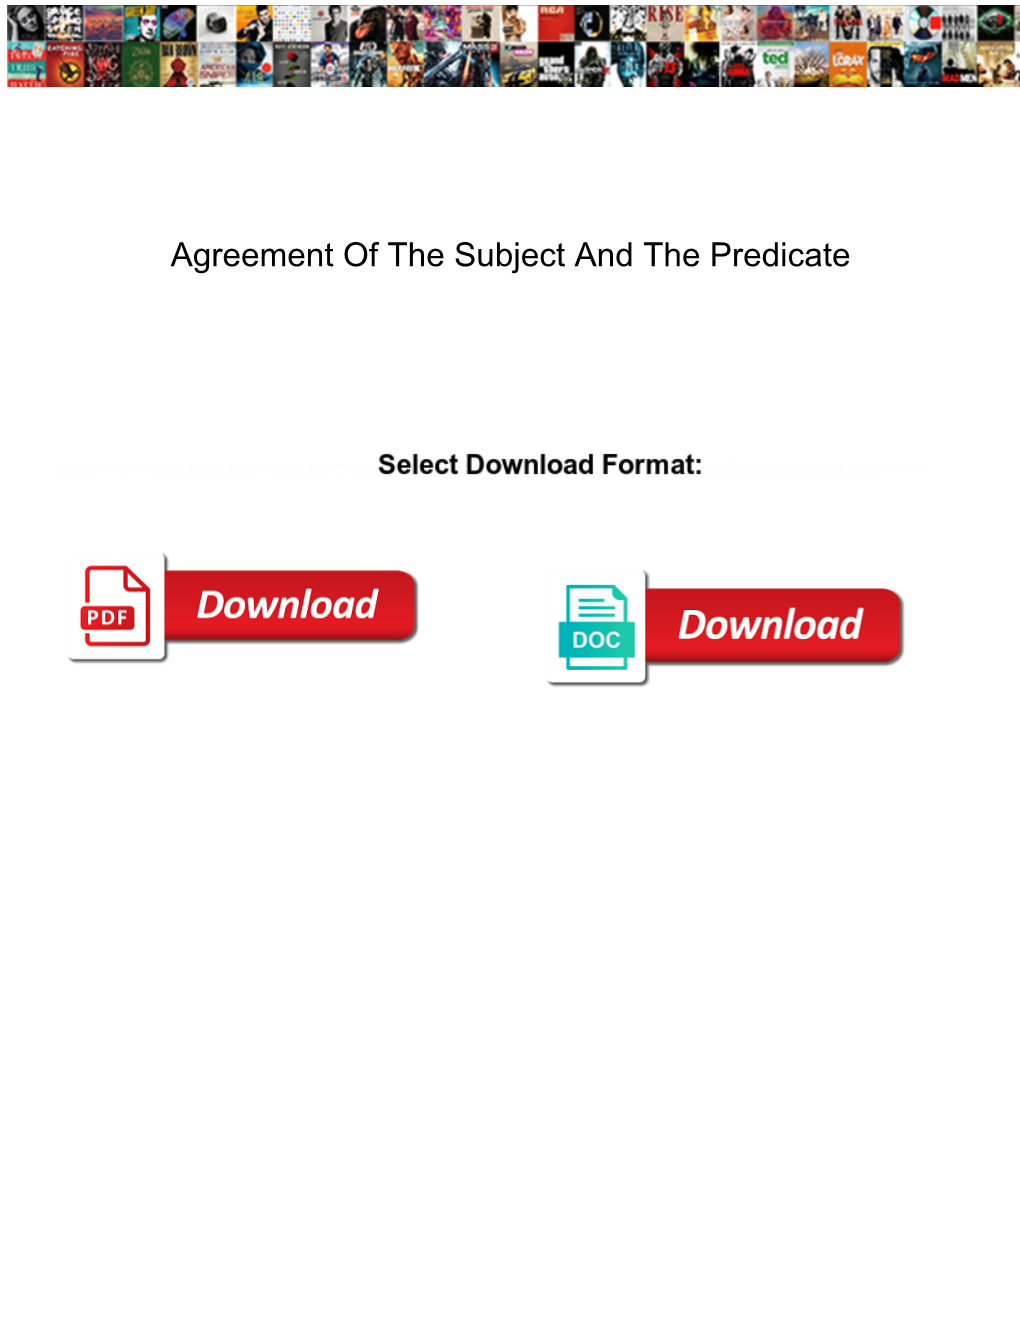 Agreement of the Subject and the Predicate